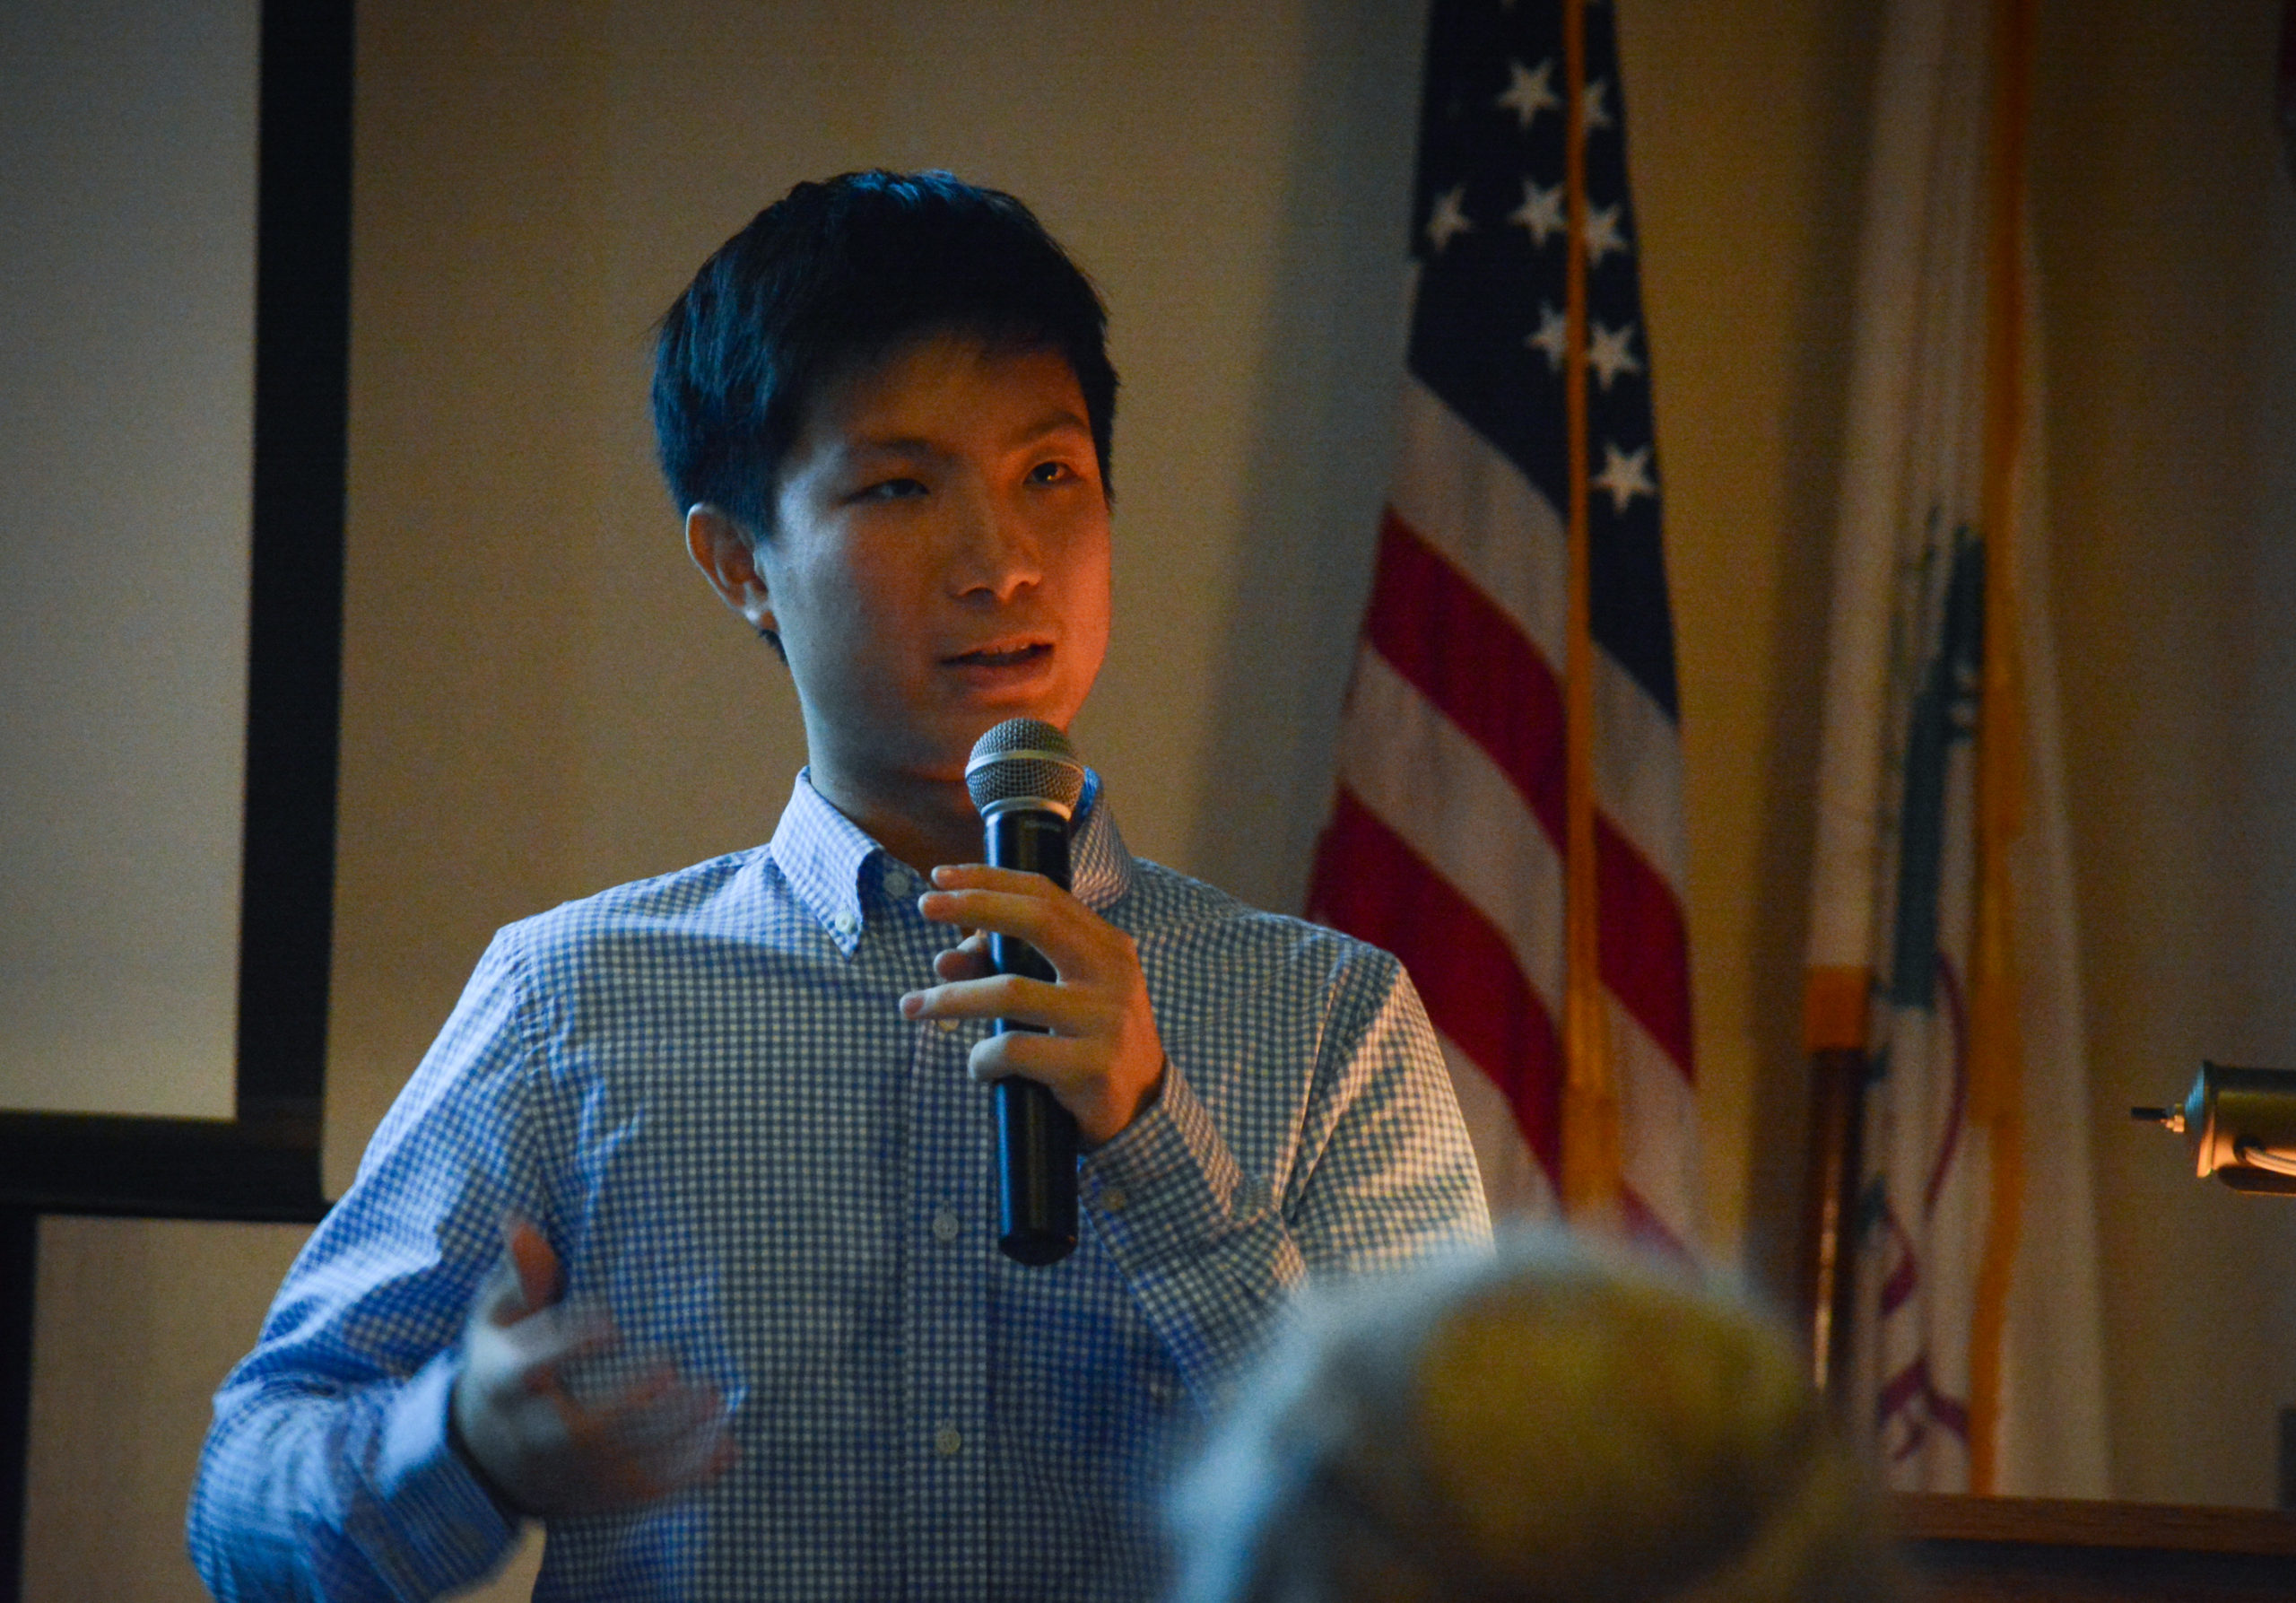 Raymond Lin answers questions from attendees at the Great Neck House about his and Abizadeh's research. (Photo by Janelle Clausen)